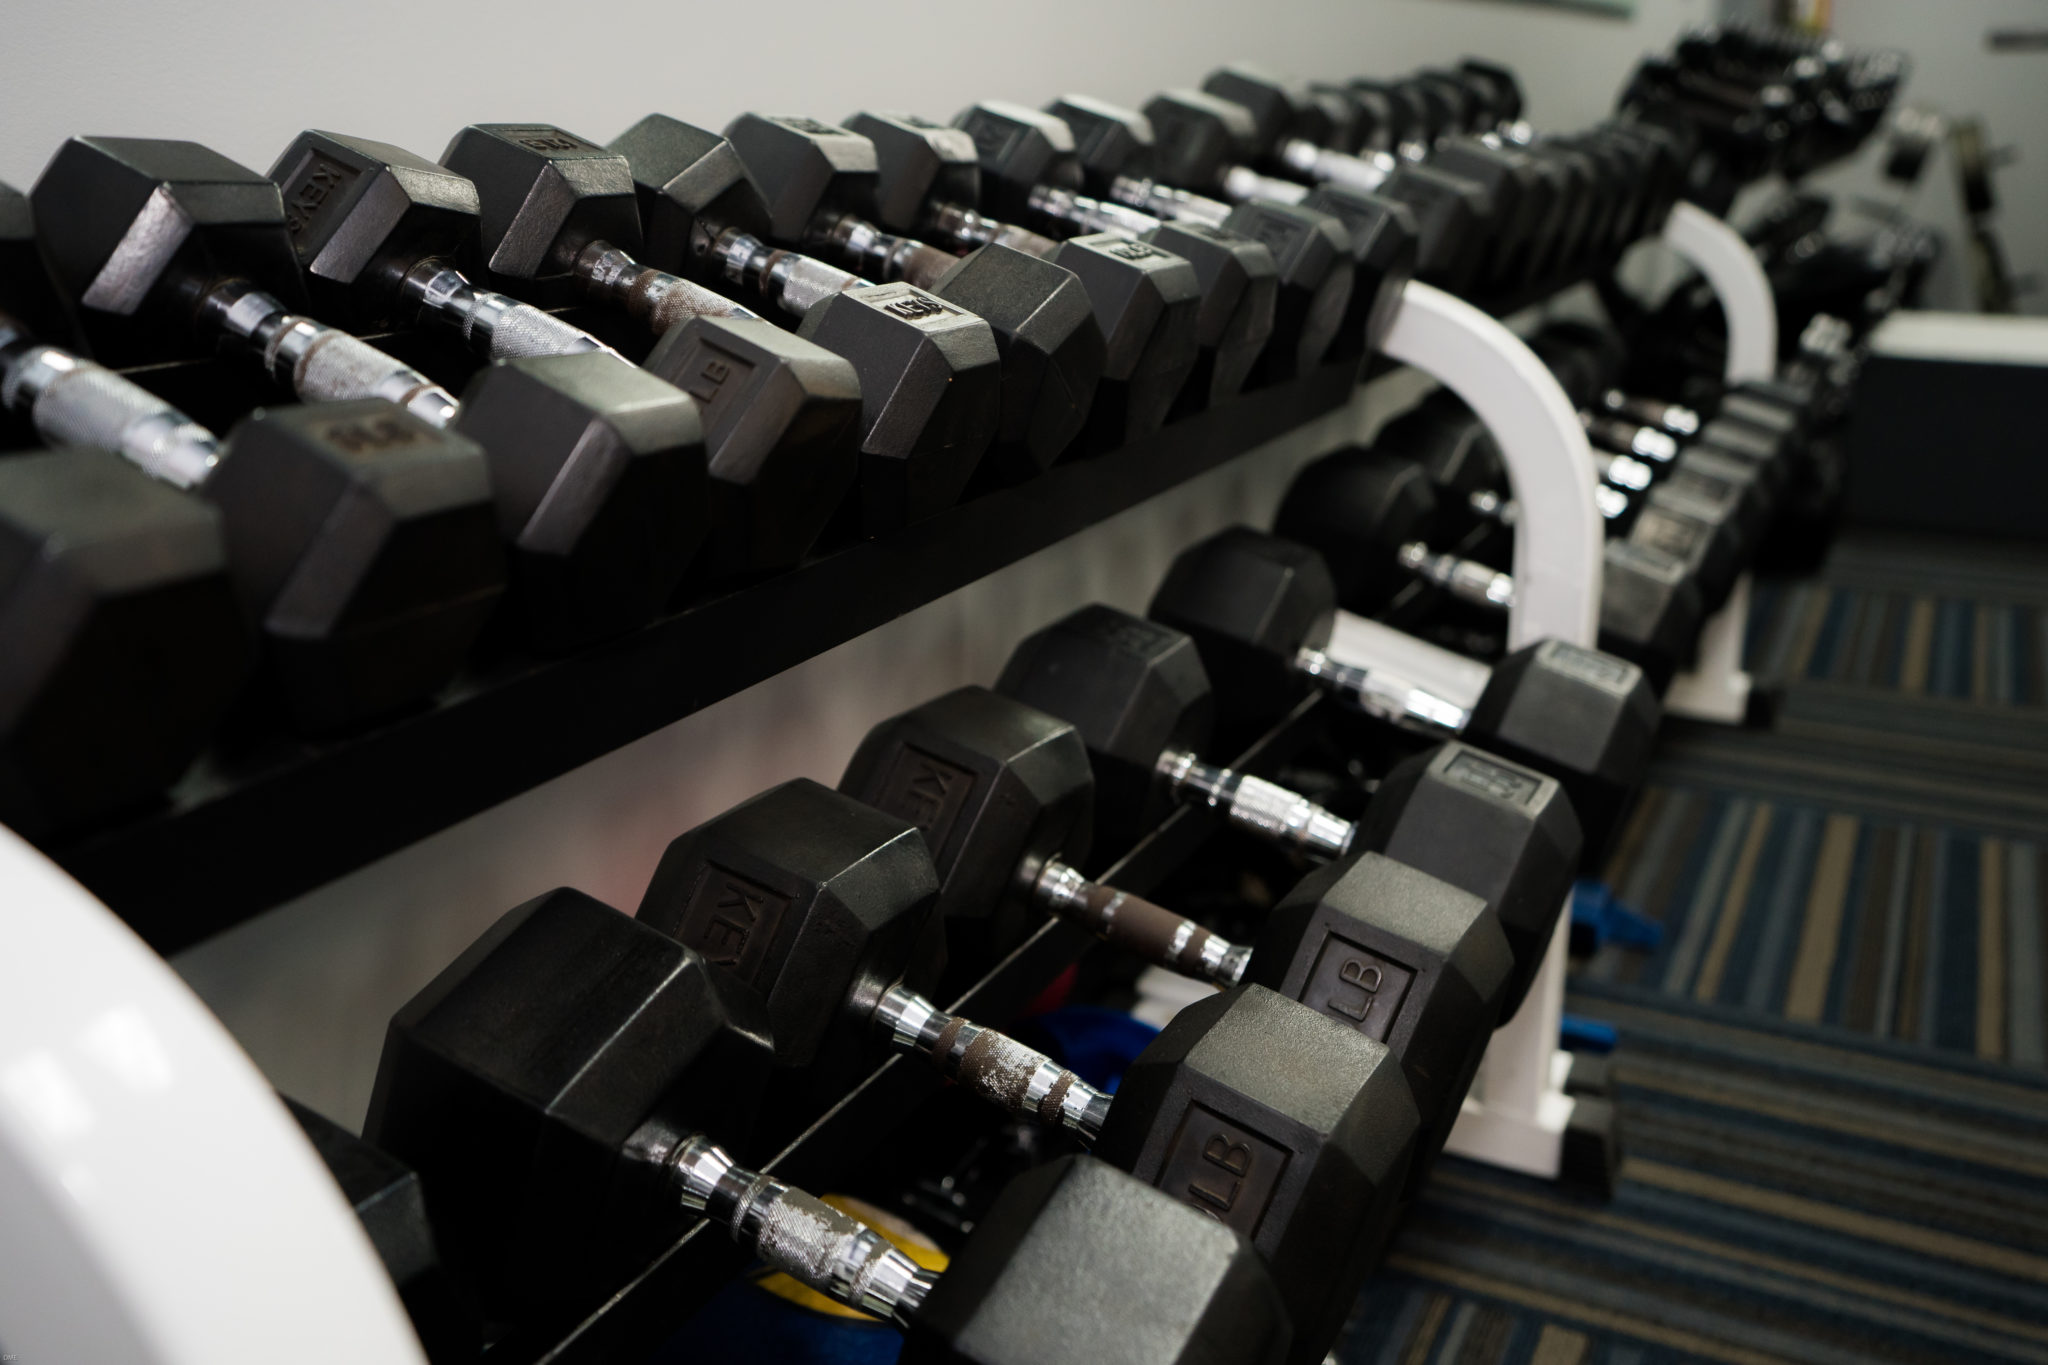 Fitness center with dumbells